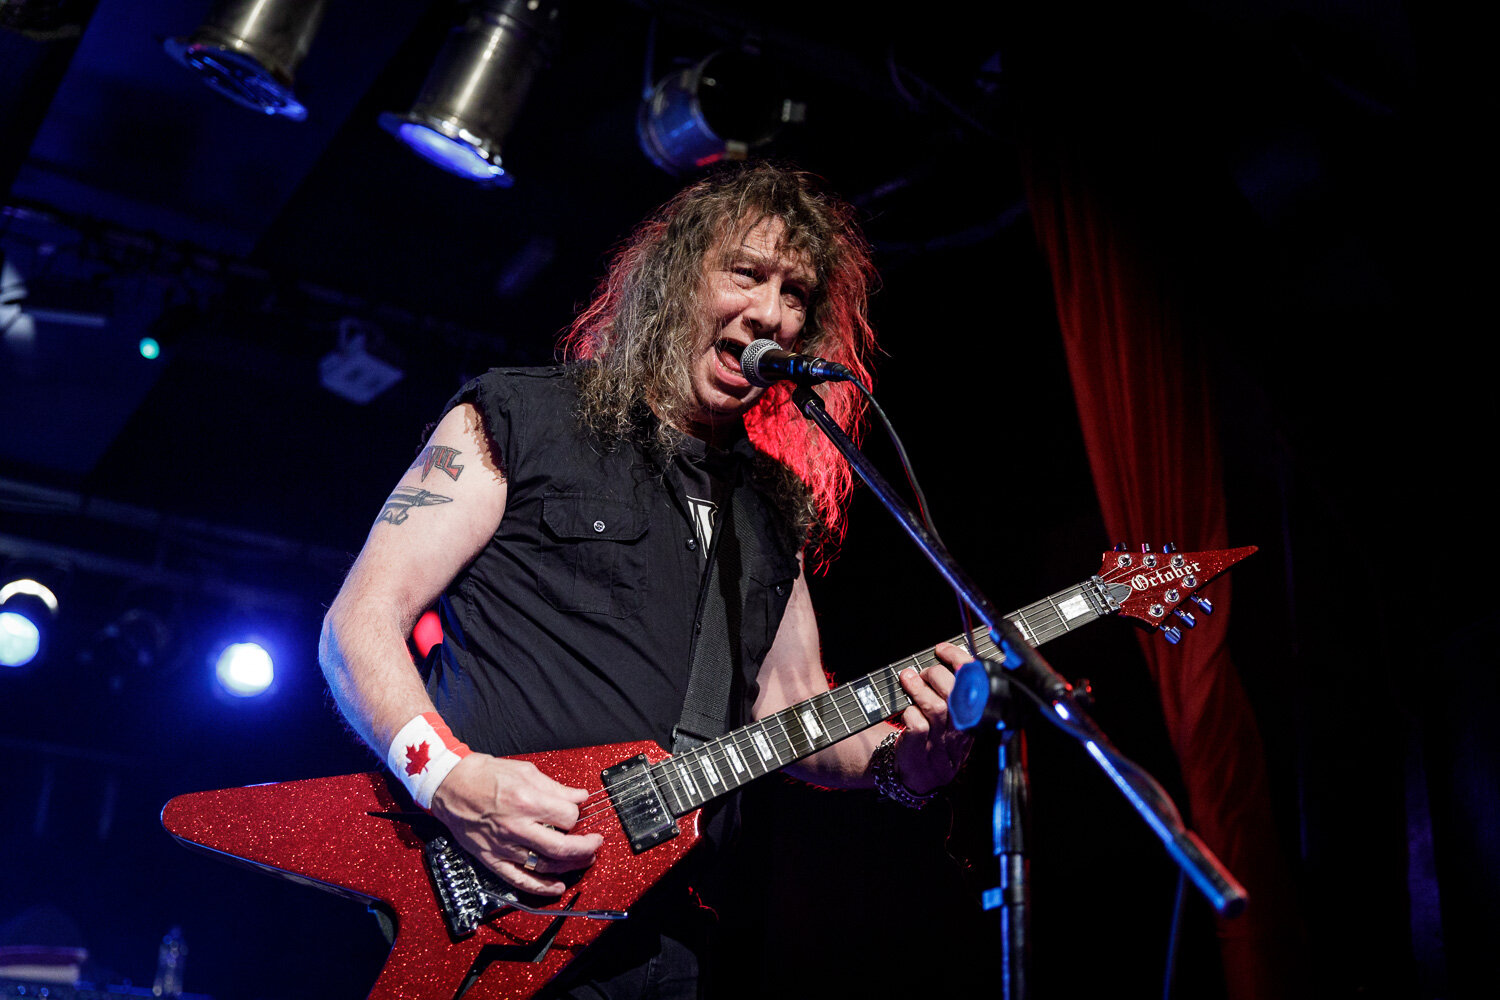 Anvil at the Tivoli in Buckley on March 6th 2020 